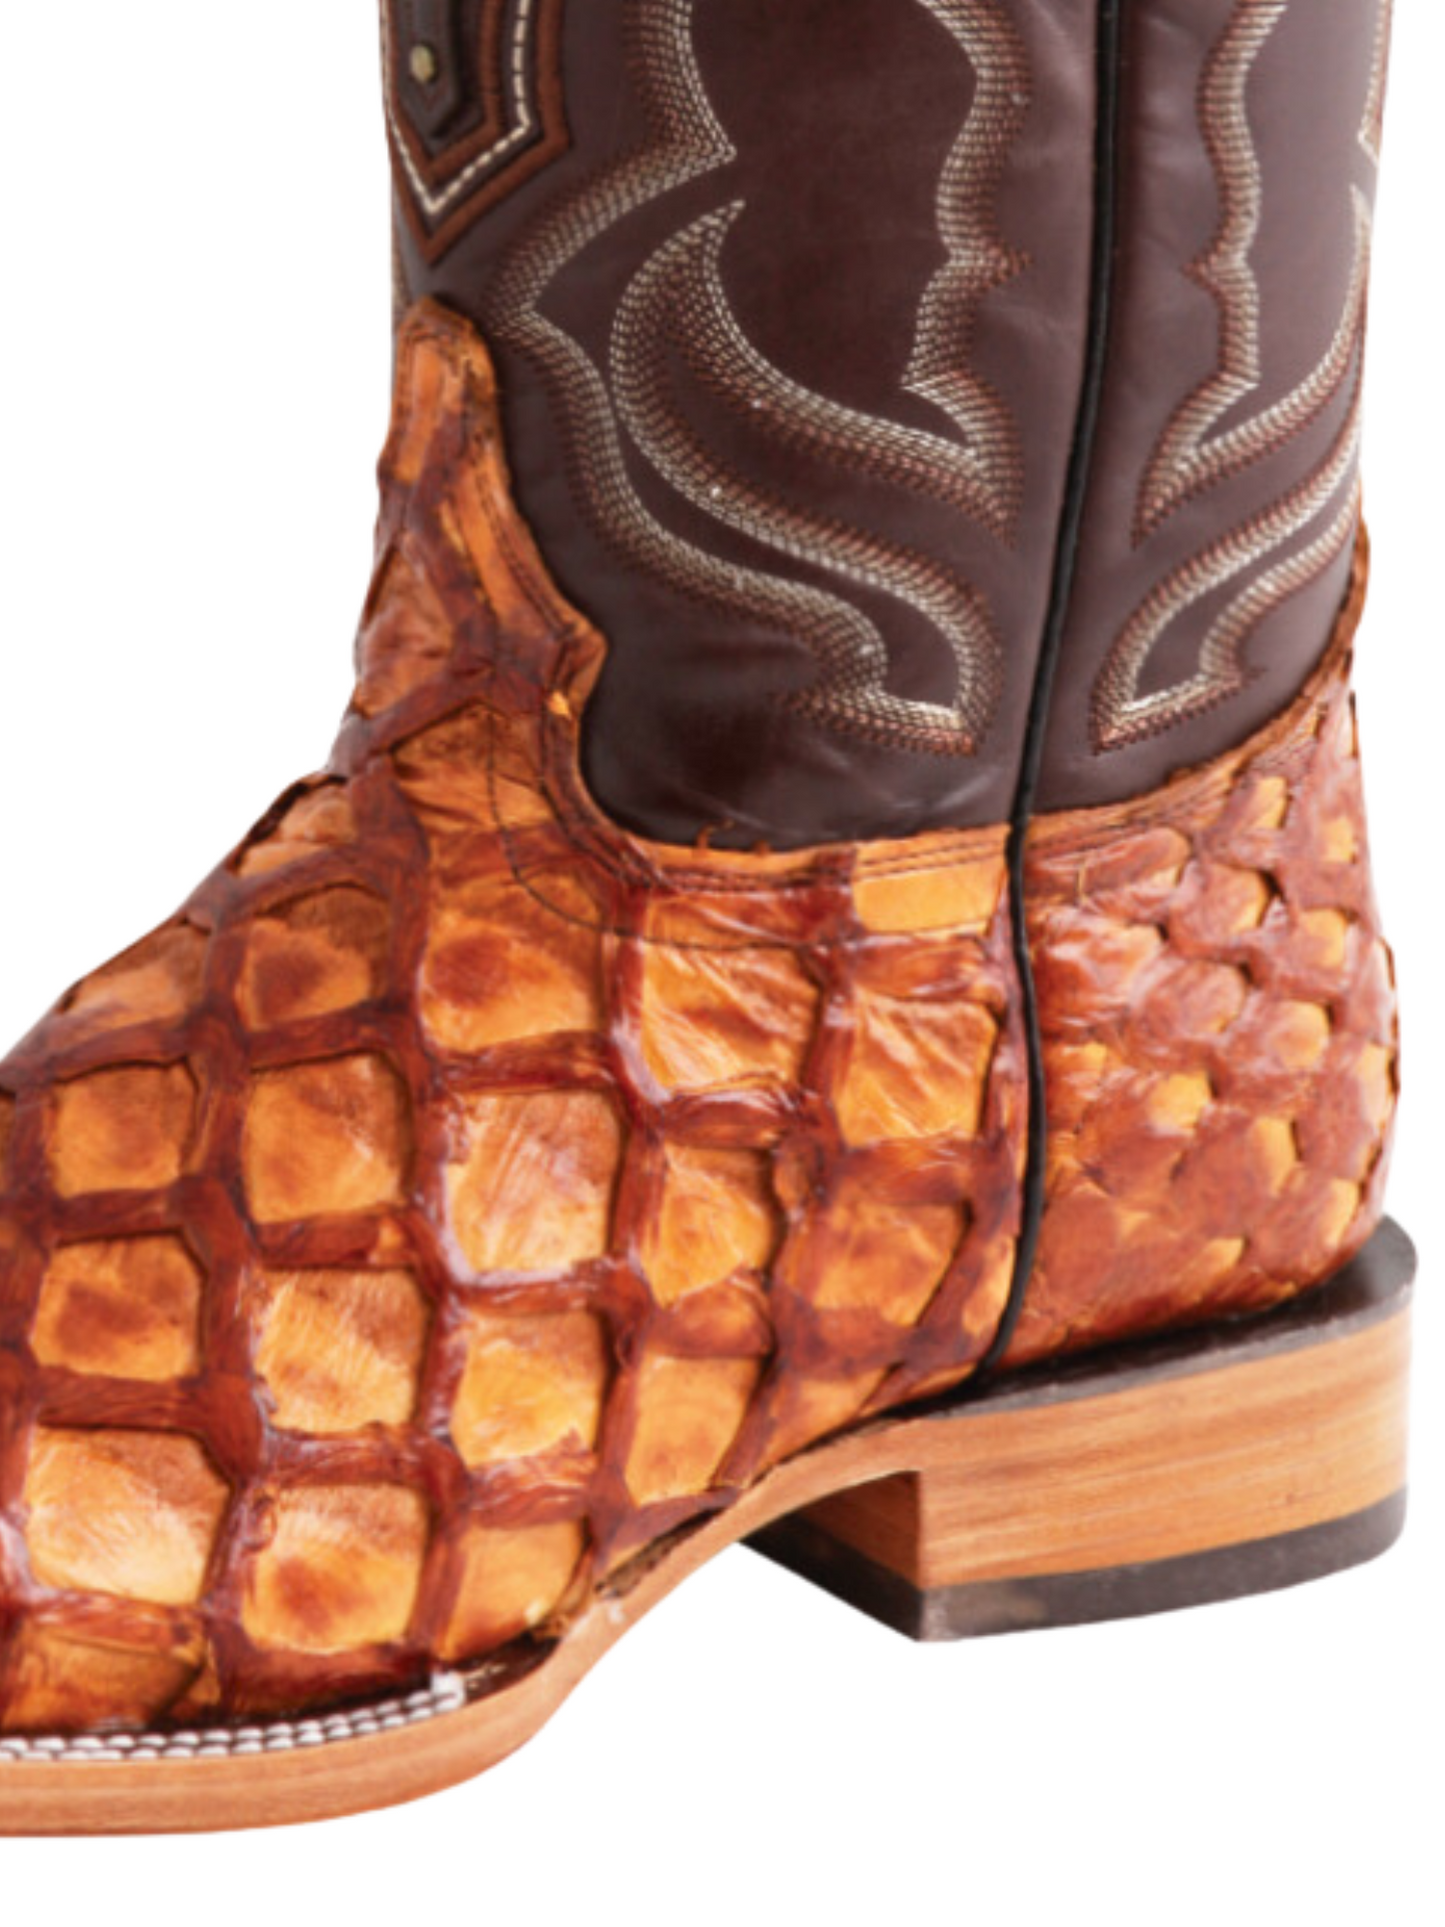 Monster Fish Original Exotic Rodeo Cowboy Boots for Men '100 Years' - ID: 44606